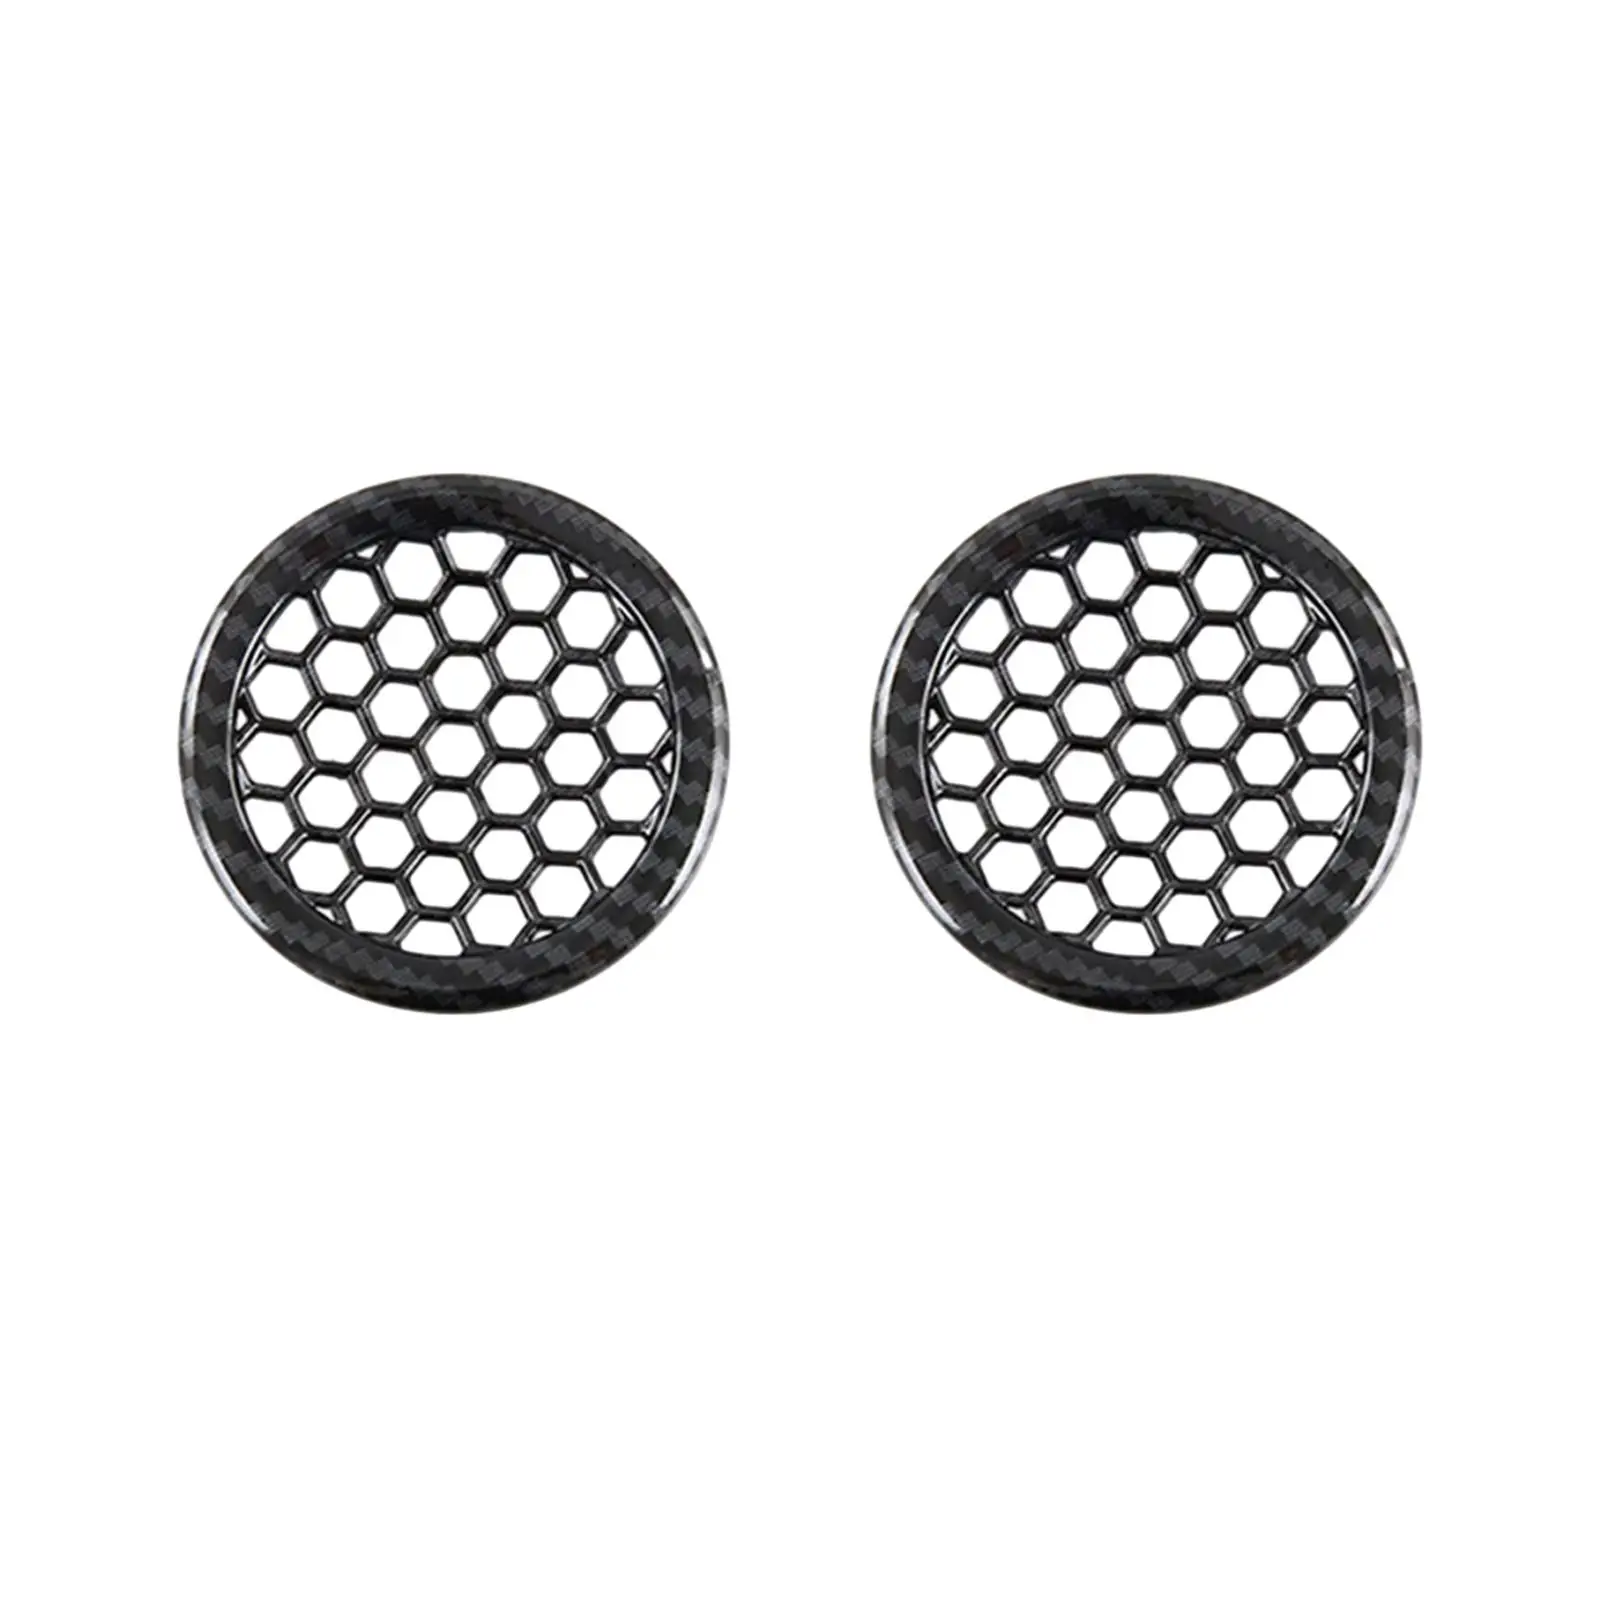 2x Car Inner Door Horn Ring Covers Carbon Fiber Car Parts Auto Speaker Ring Durable Loudspeaker Circle Trim for Byd Dolphin